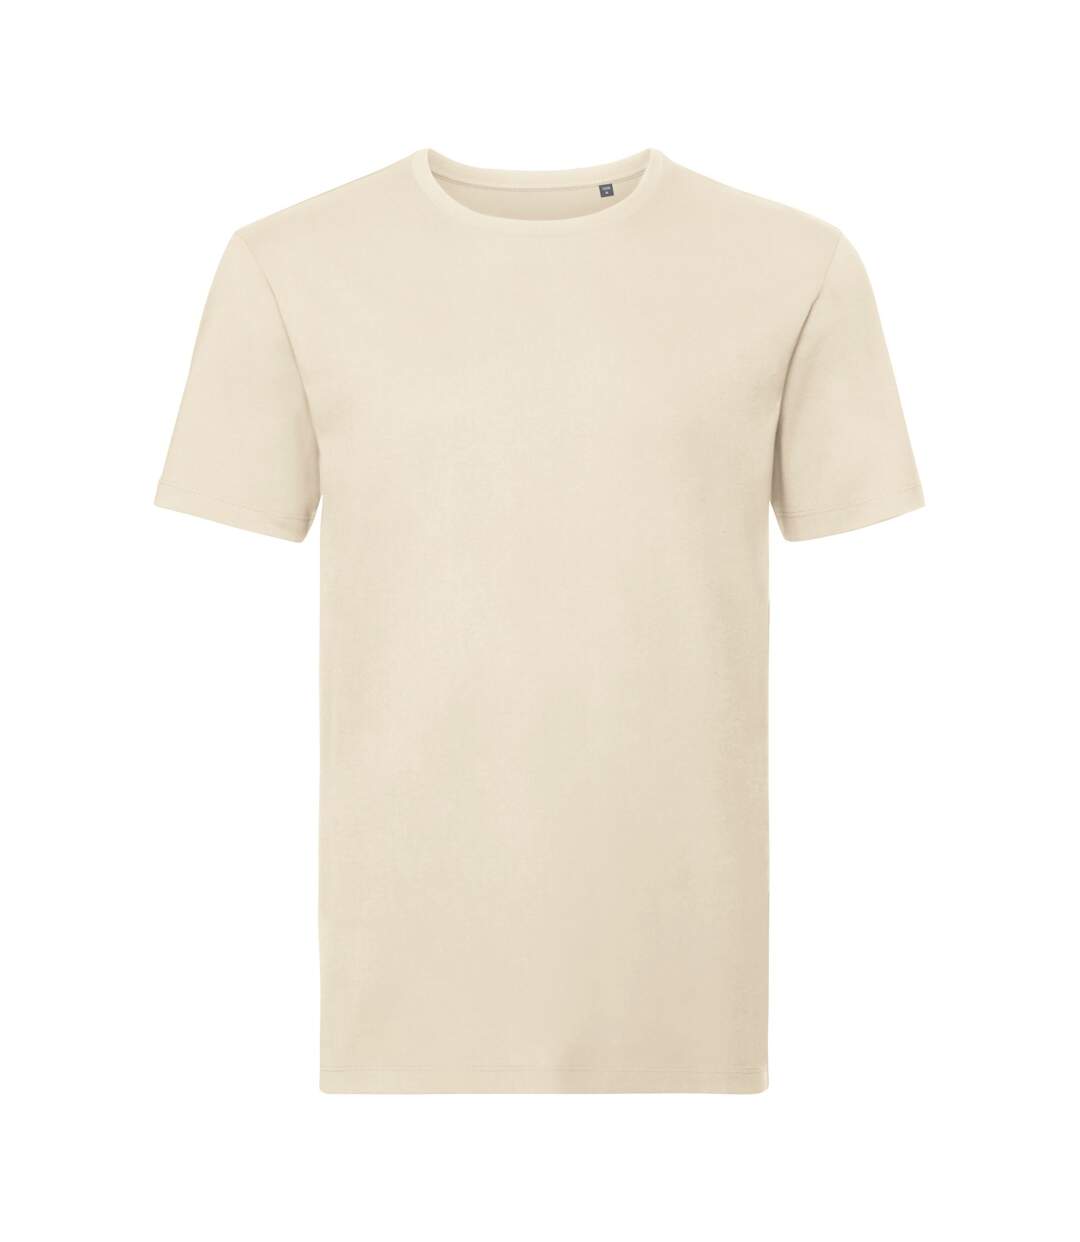 Russell - T-shirt manches courtes AUTHENTIC - Homme (Beige) - UTPC3569